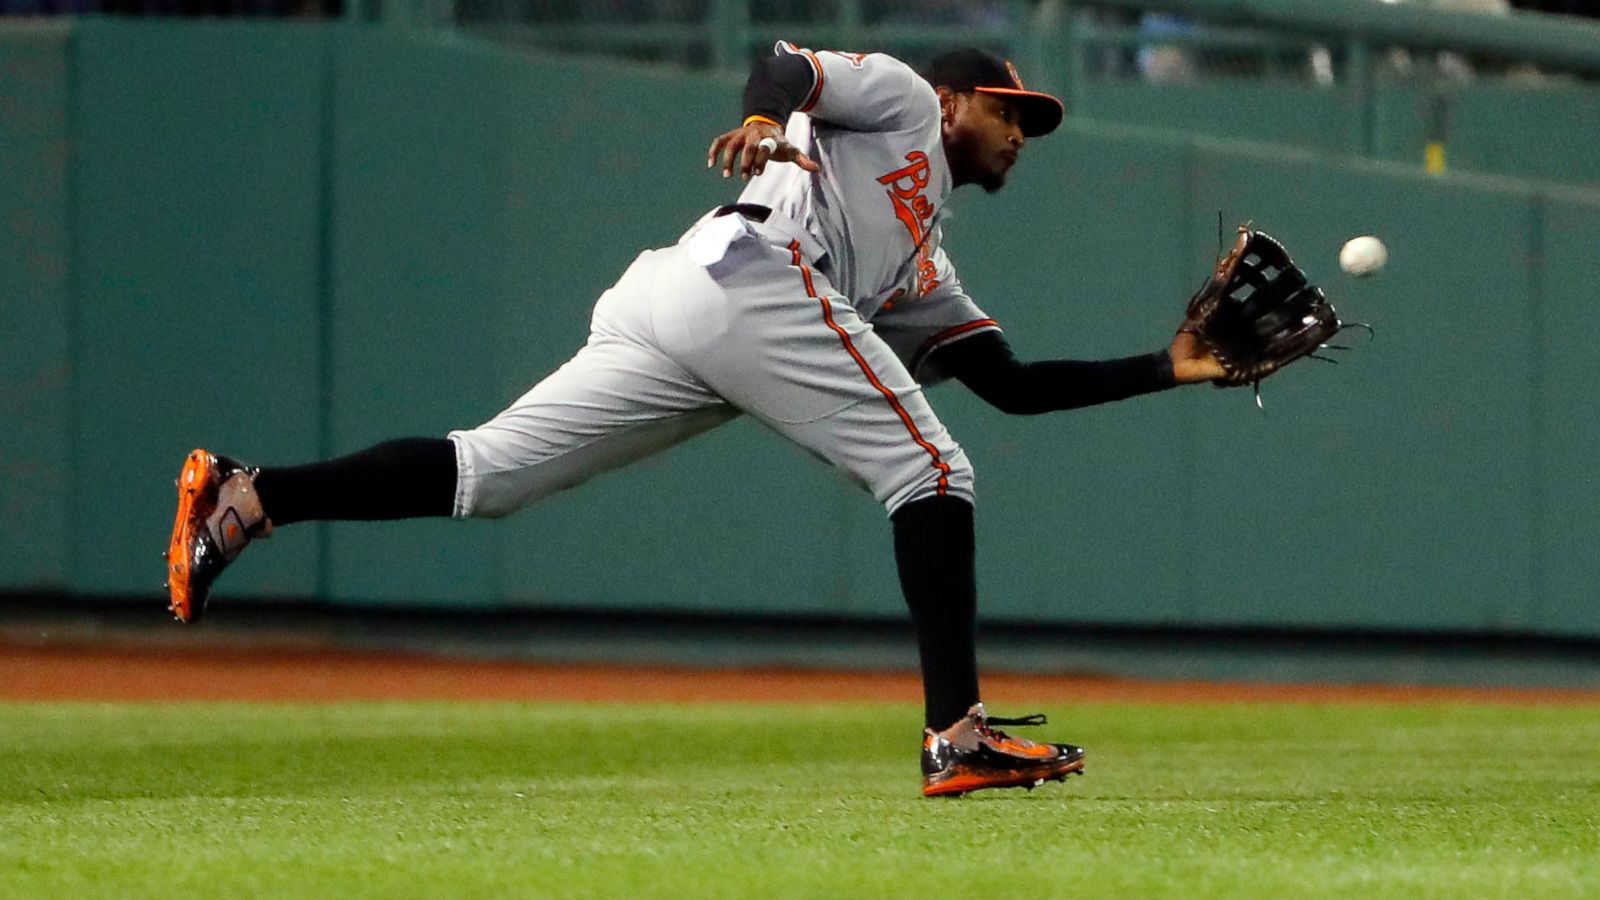 Red Sox apologize for fans' racist taunts of Orioles player Adam